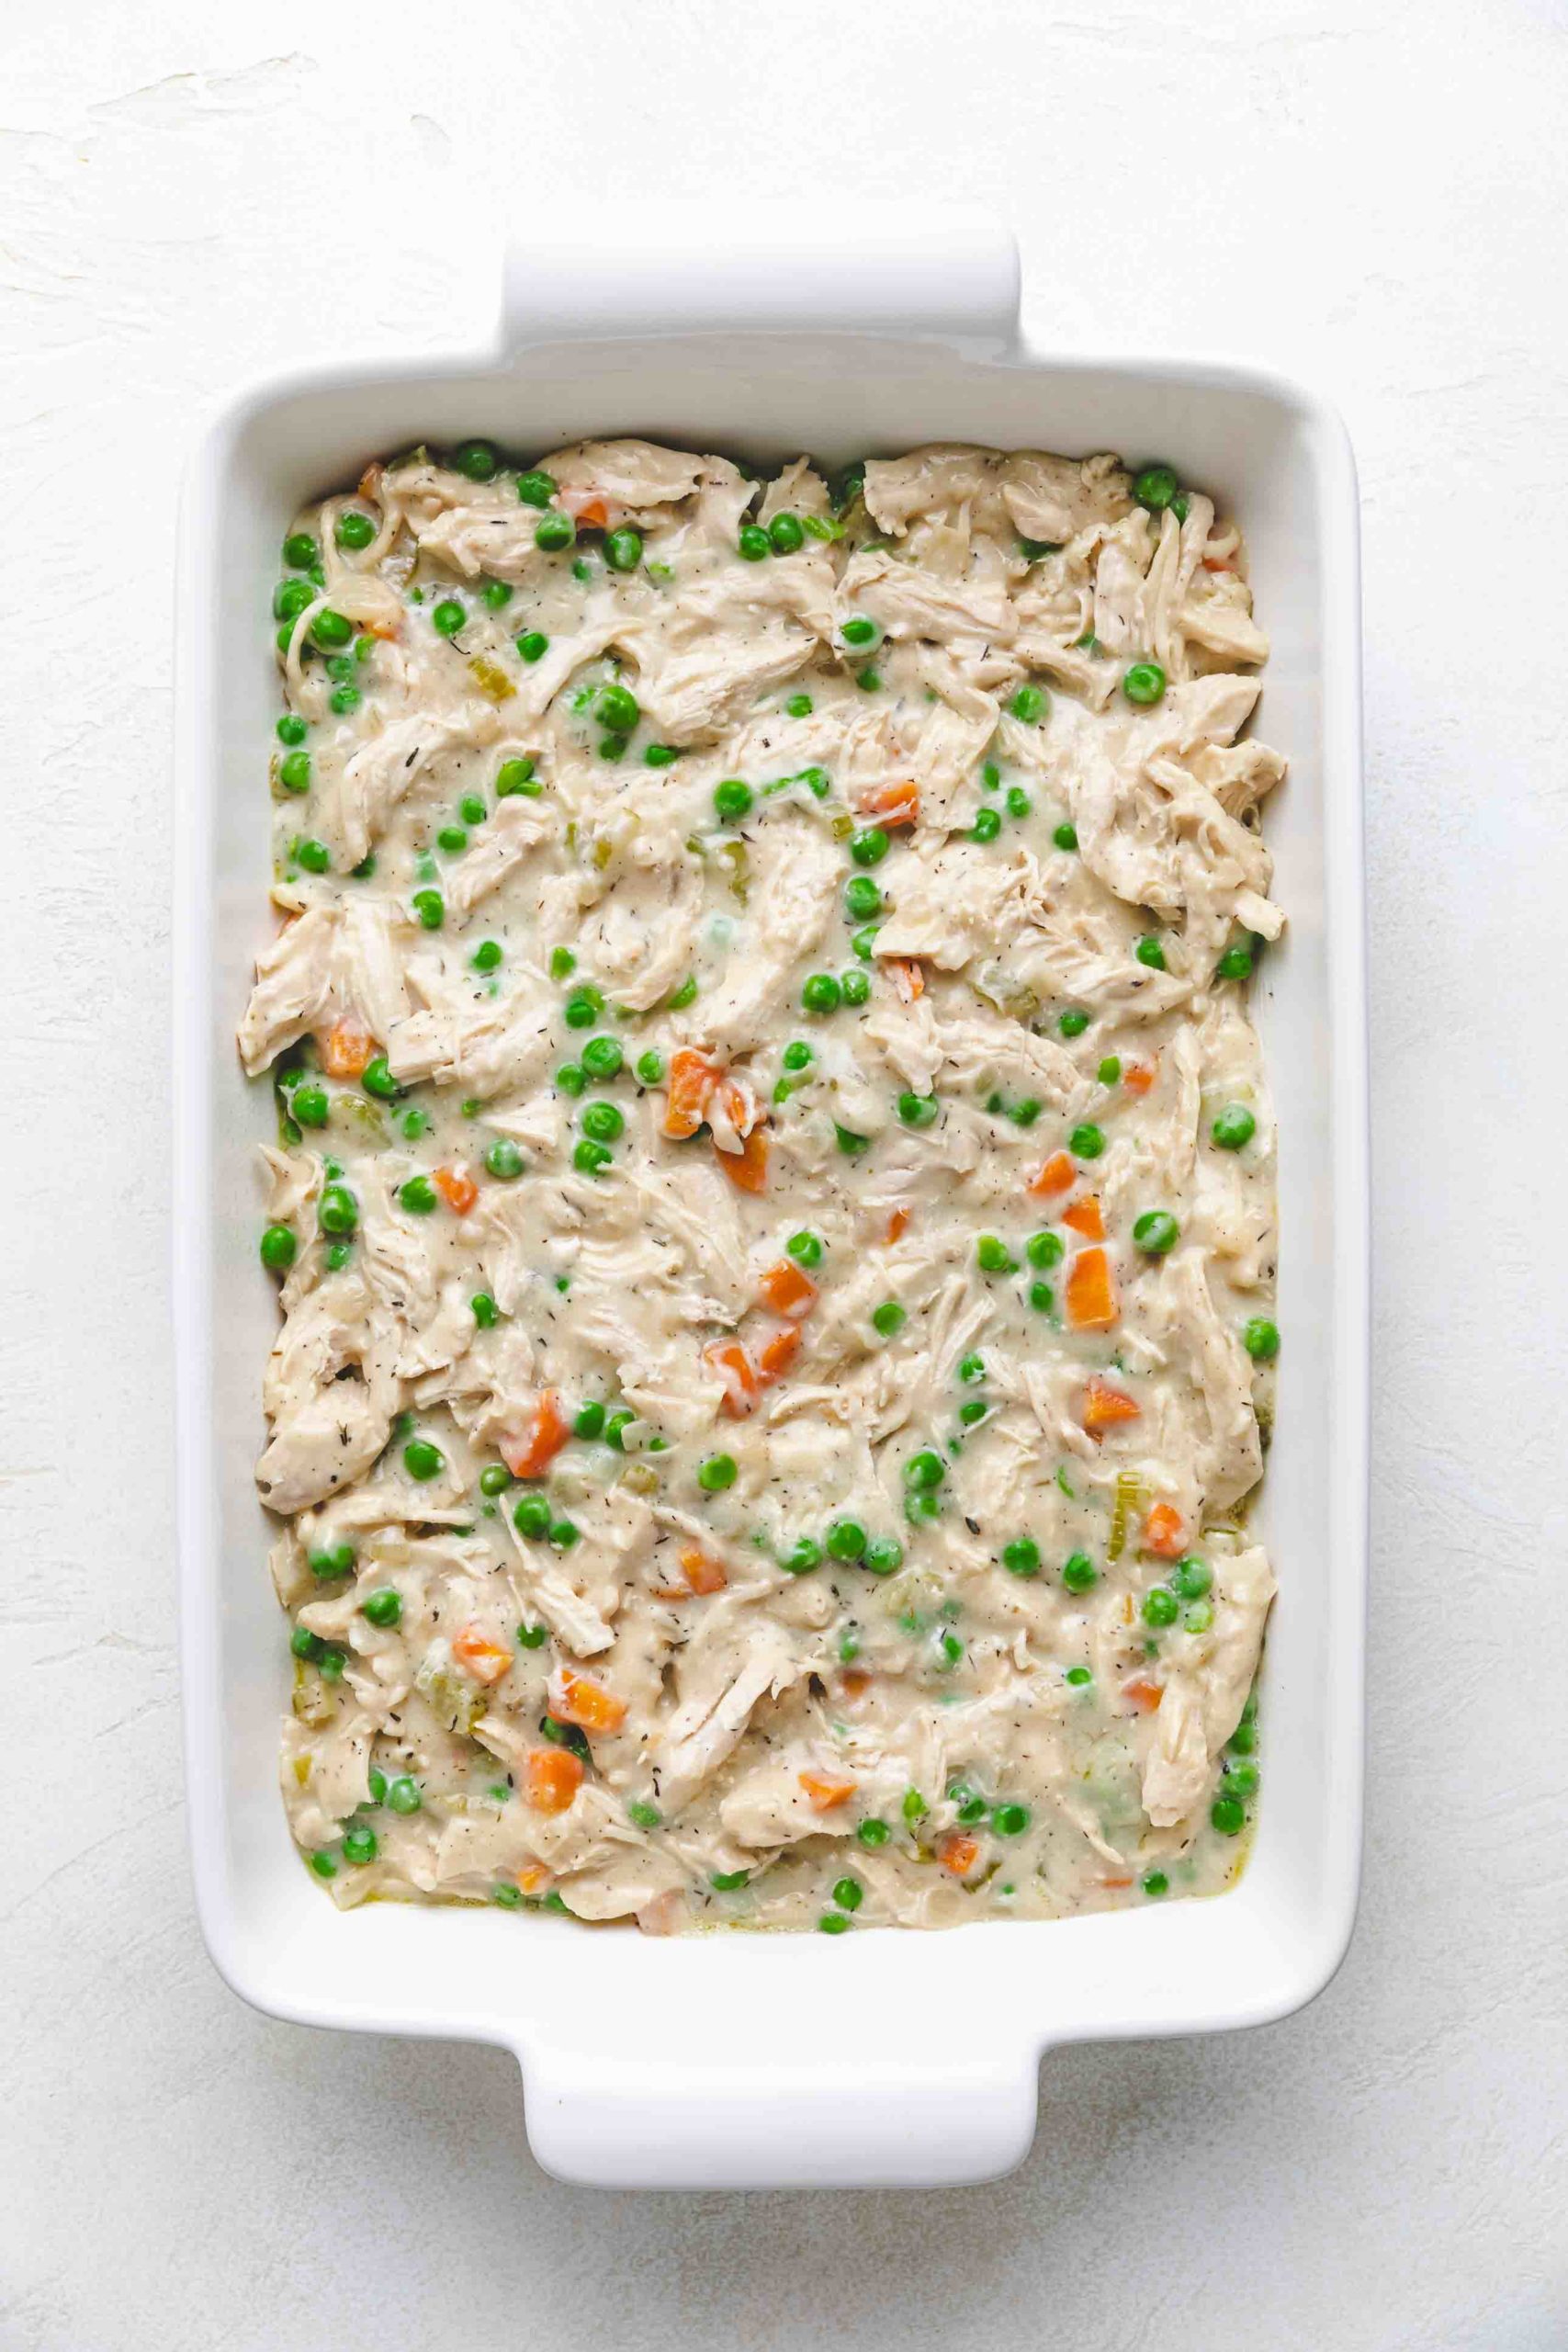 Chicken and vegetable filling in a baking dish.